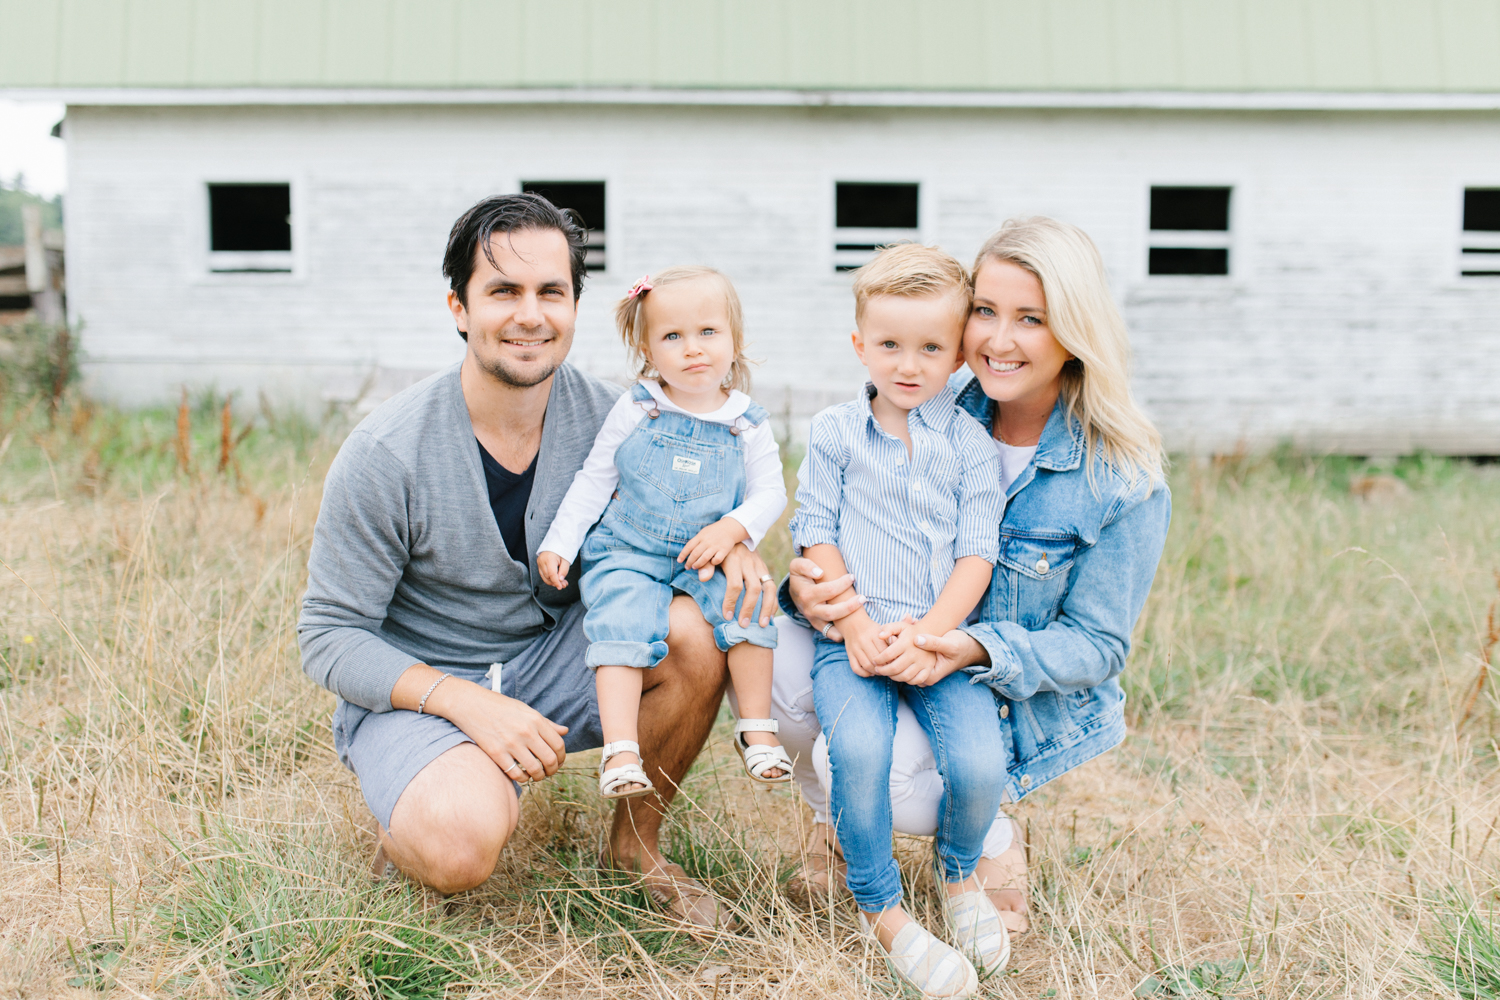 Rose Ranch Family Photo Session | Monika Hibbs Family Session in South Bend, Washington | What to Wear for Family Pictures | Pacific Northwest Family Session with Emma Rose Company-22.jpg